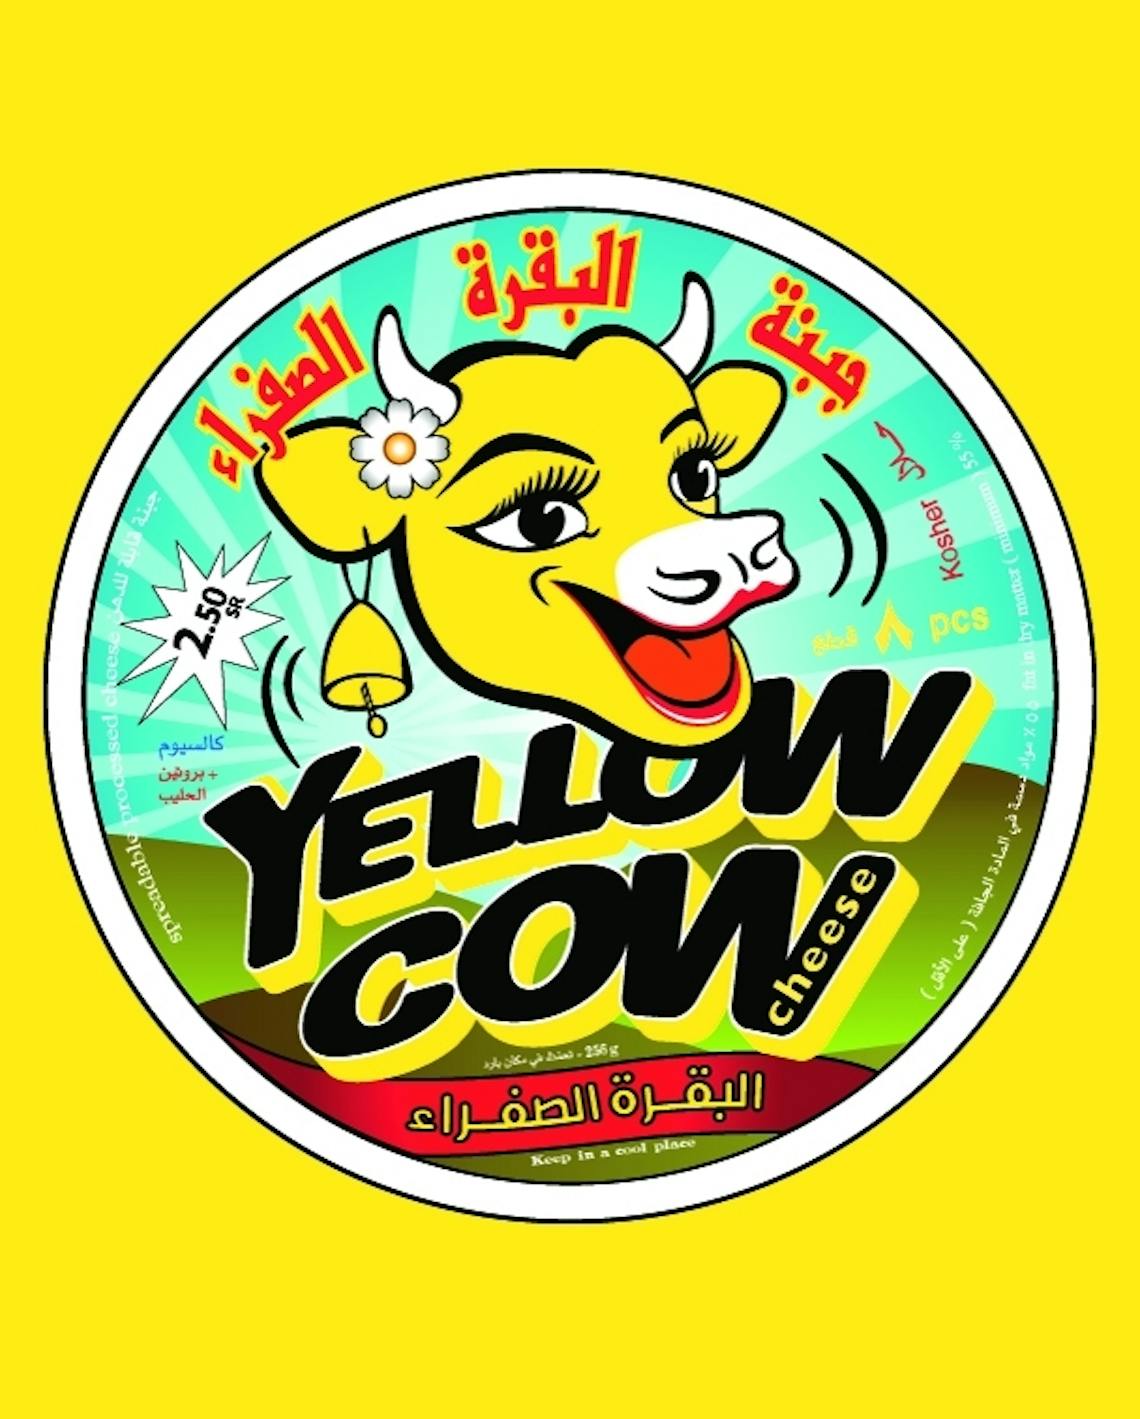 Ahmed Mater Yellow Cow 2010 Edge of Arabia Istanbul 2010